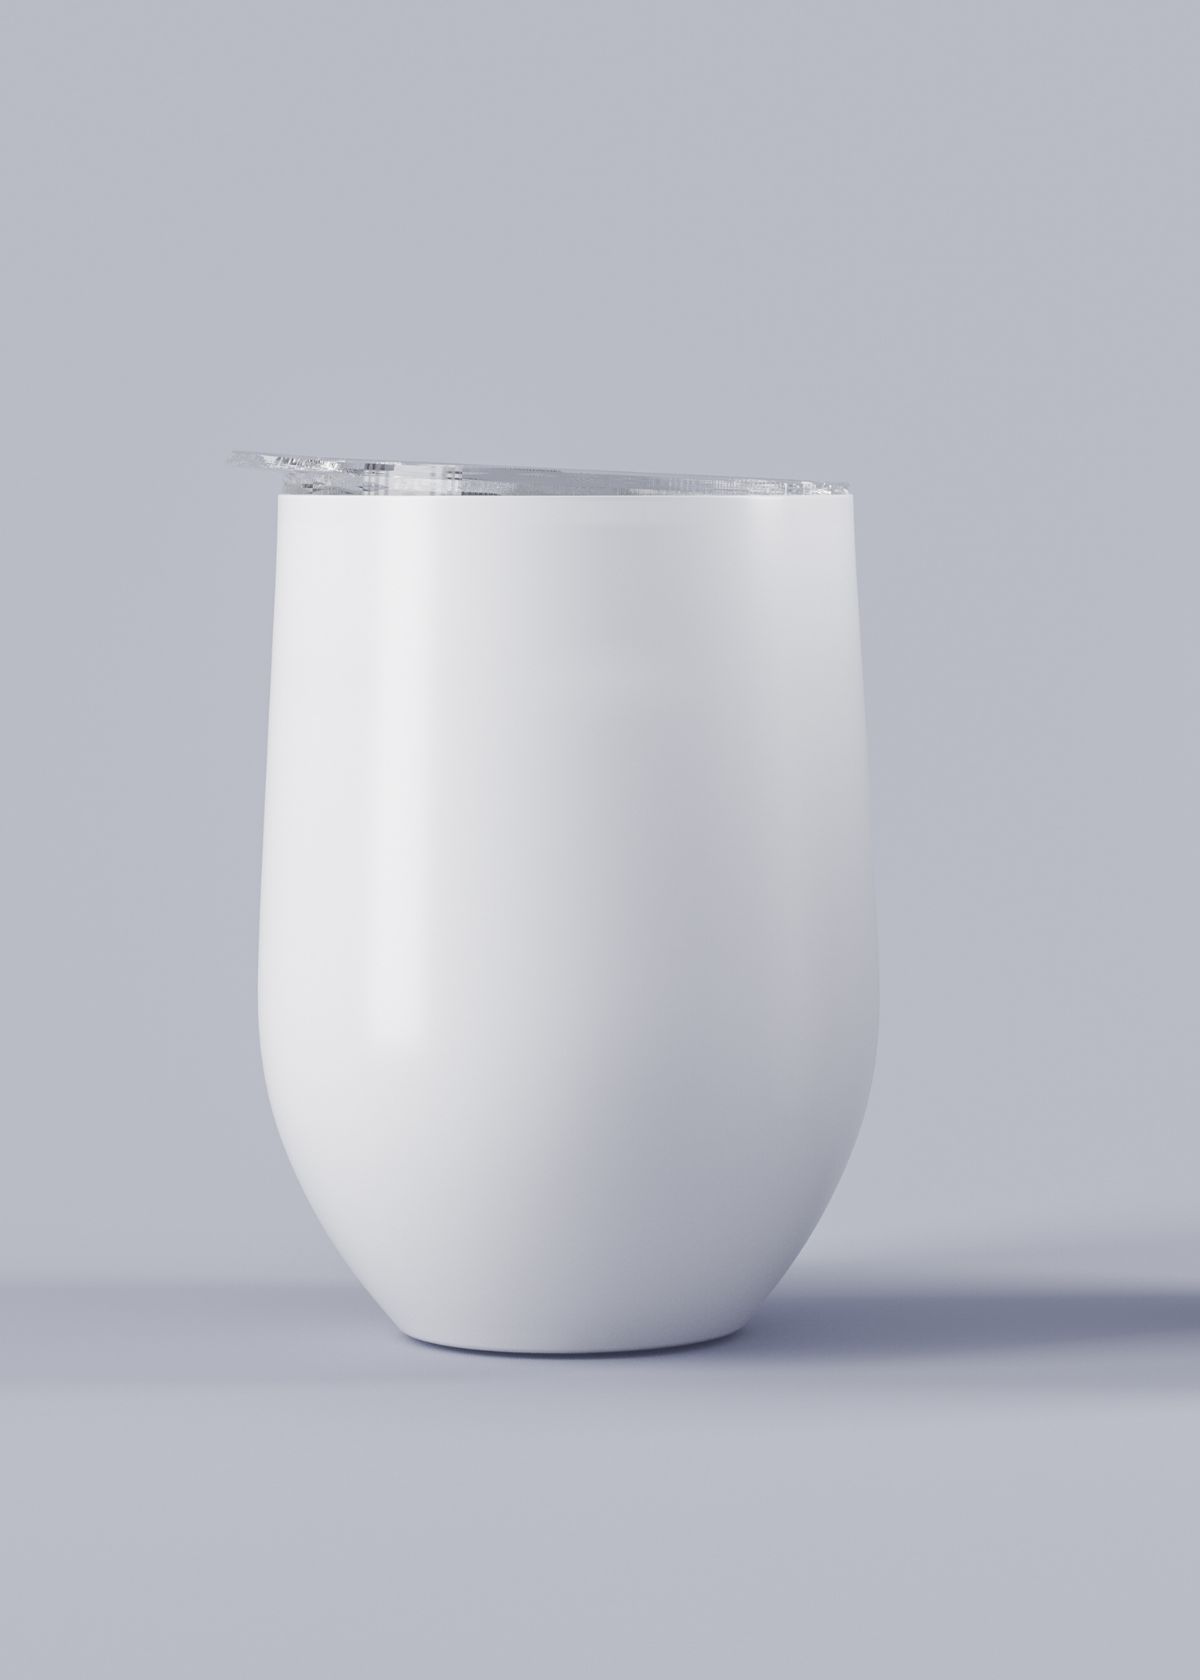 Can a Wine Tumbler Be Used for Coffee